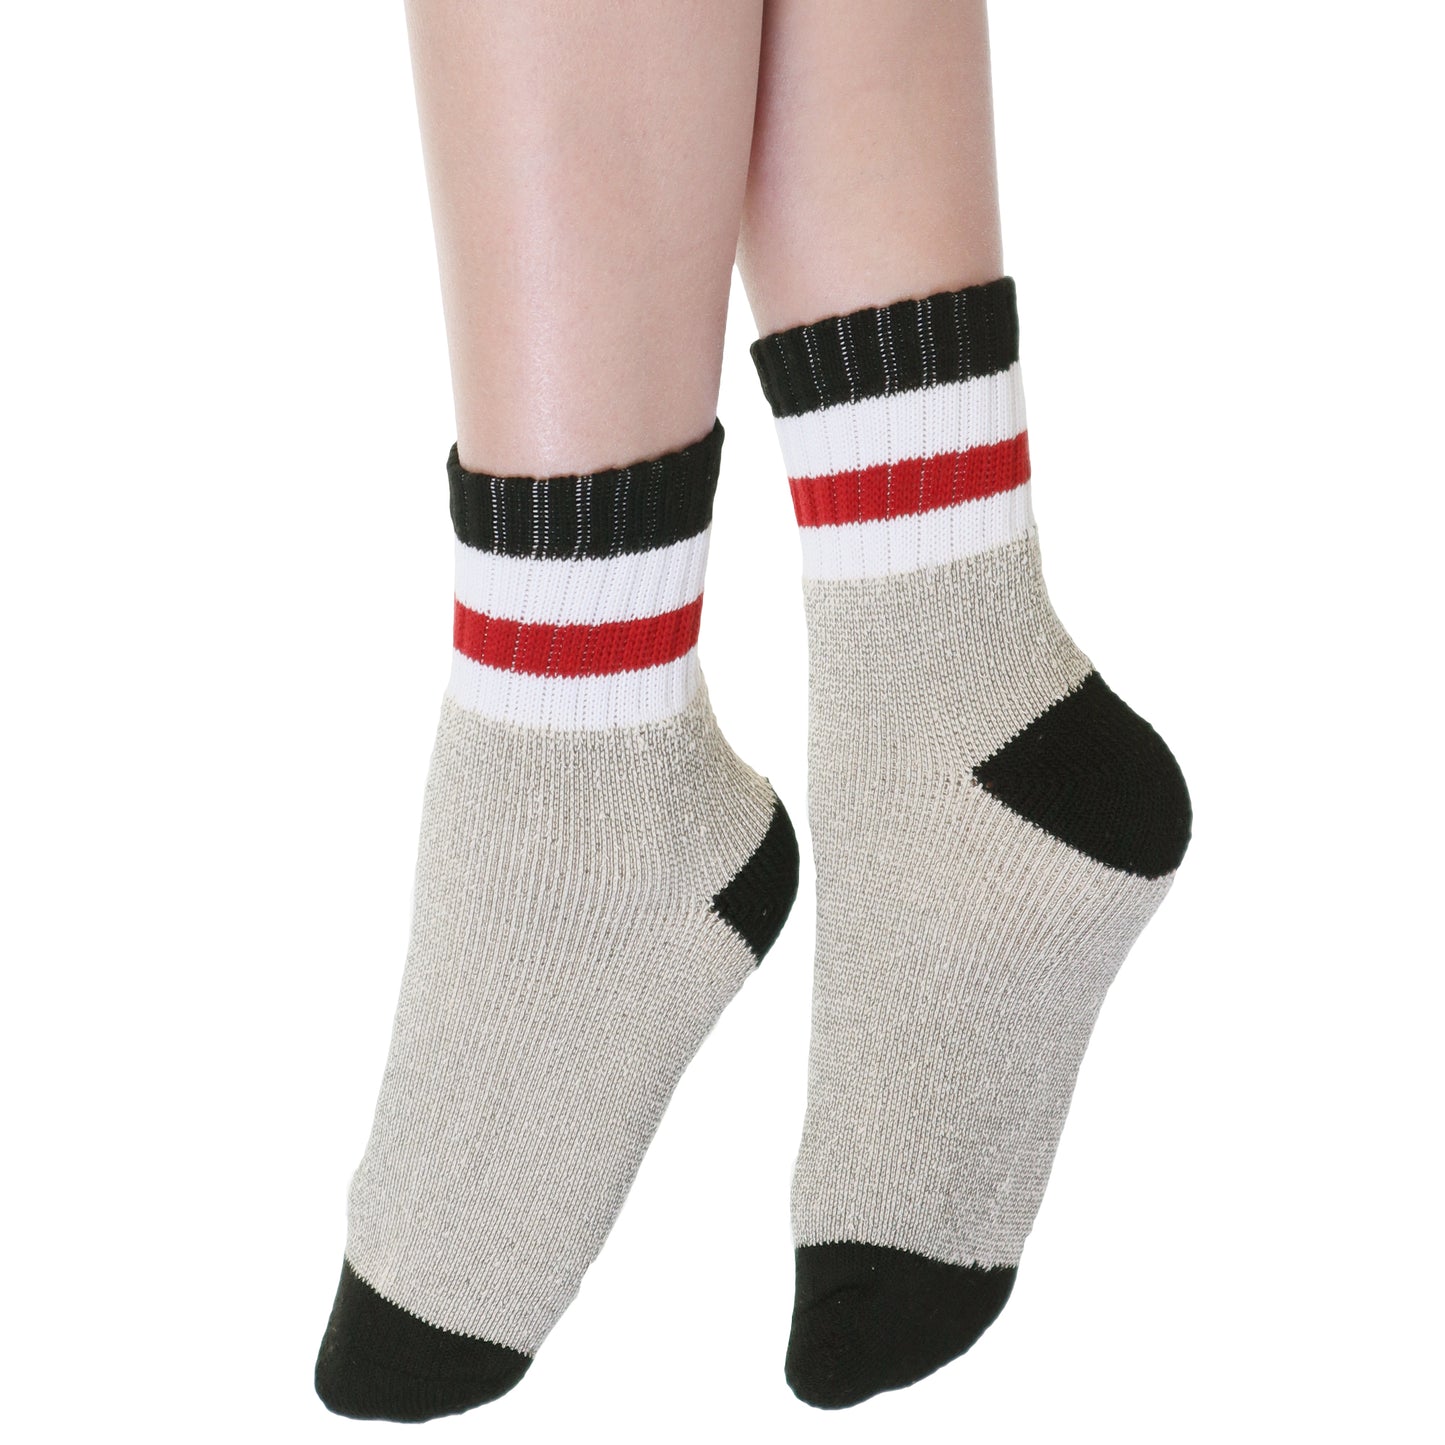 Angelina Unisex Quarter Socks with Striped Pattern Cuff (3-Pairs), #2563